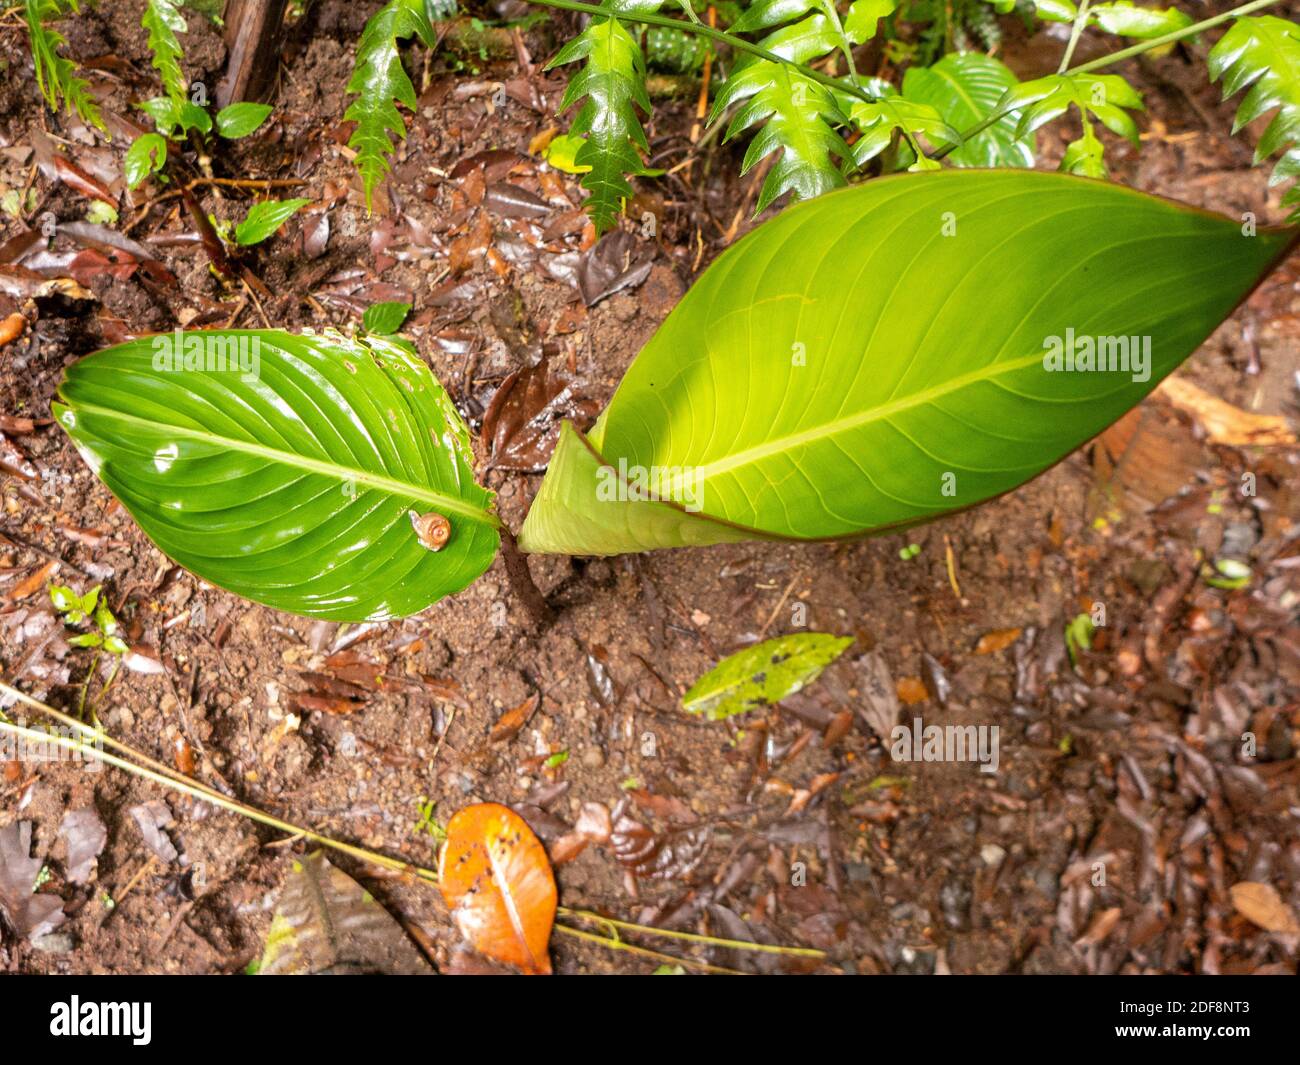 The rainforest of Costa Rica. Banana leaves and other large-leaved plants grow on the bottom of the tropical forest. Stock Photo